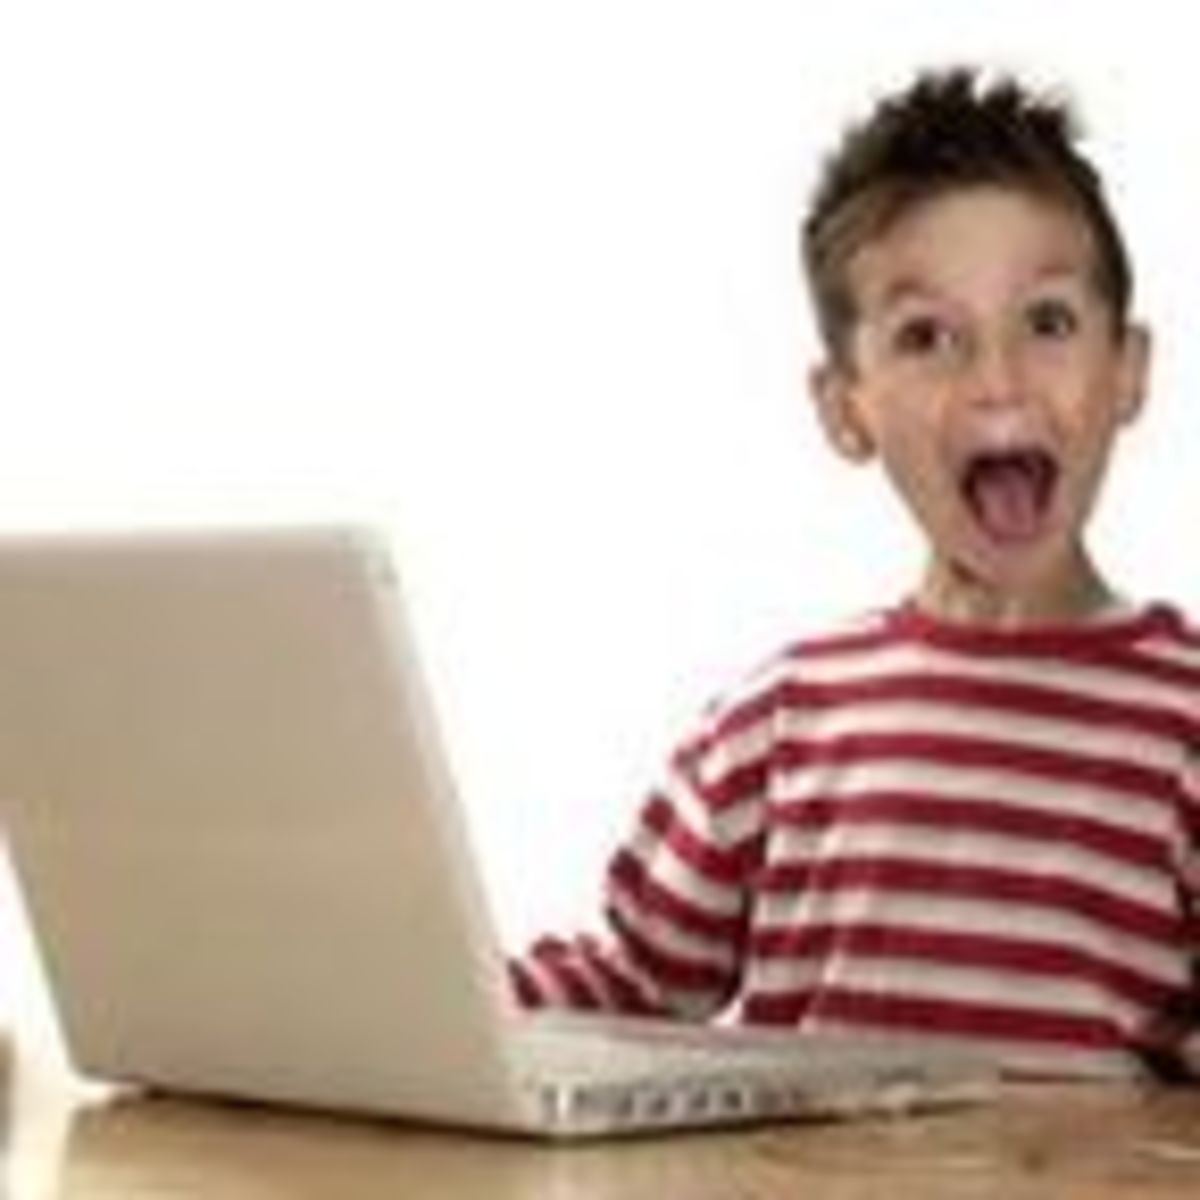 3d Toddler - Pornography:The New Sex Ed For Kids | Psychology Today